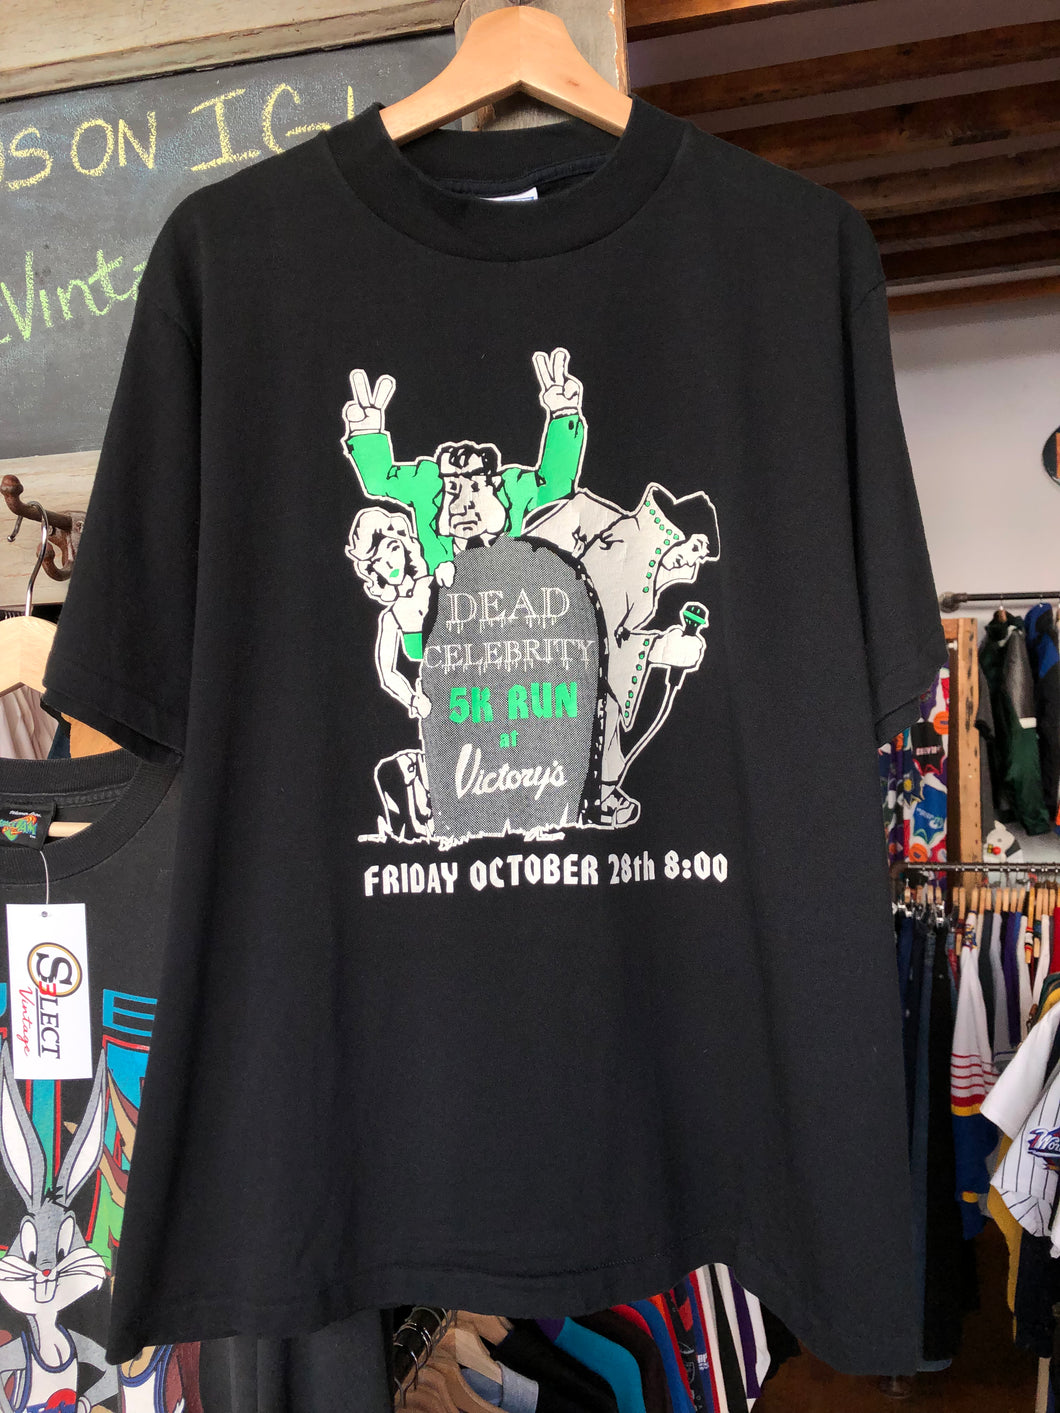 Vintage 1990s Single Stitched Dead Celebrity 5K Run At Victory’s Double Sided Tee Size Large